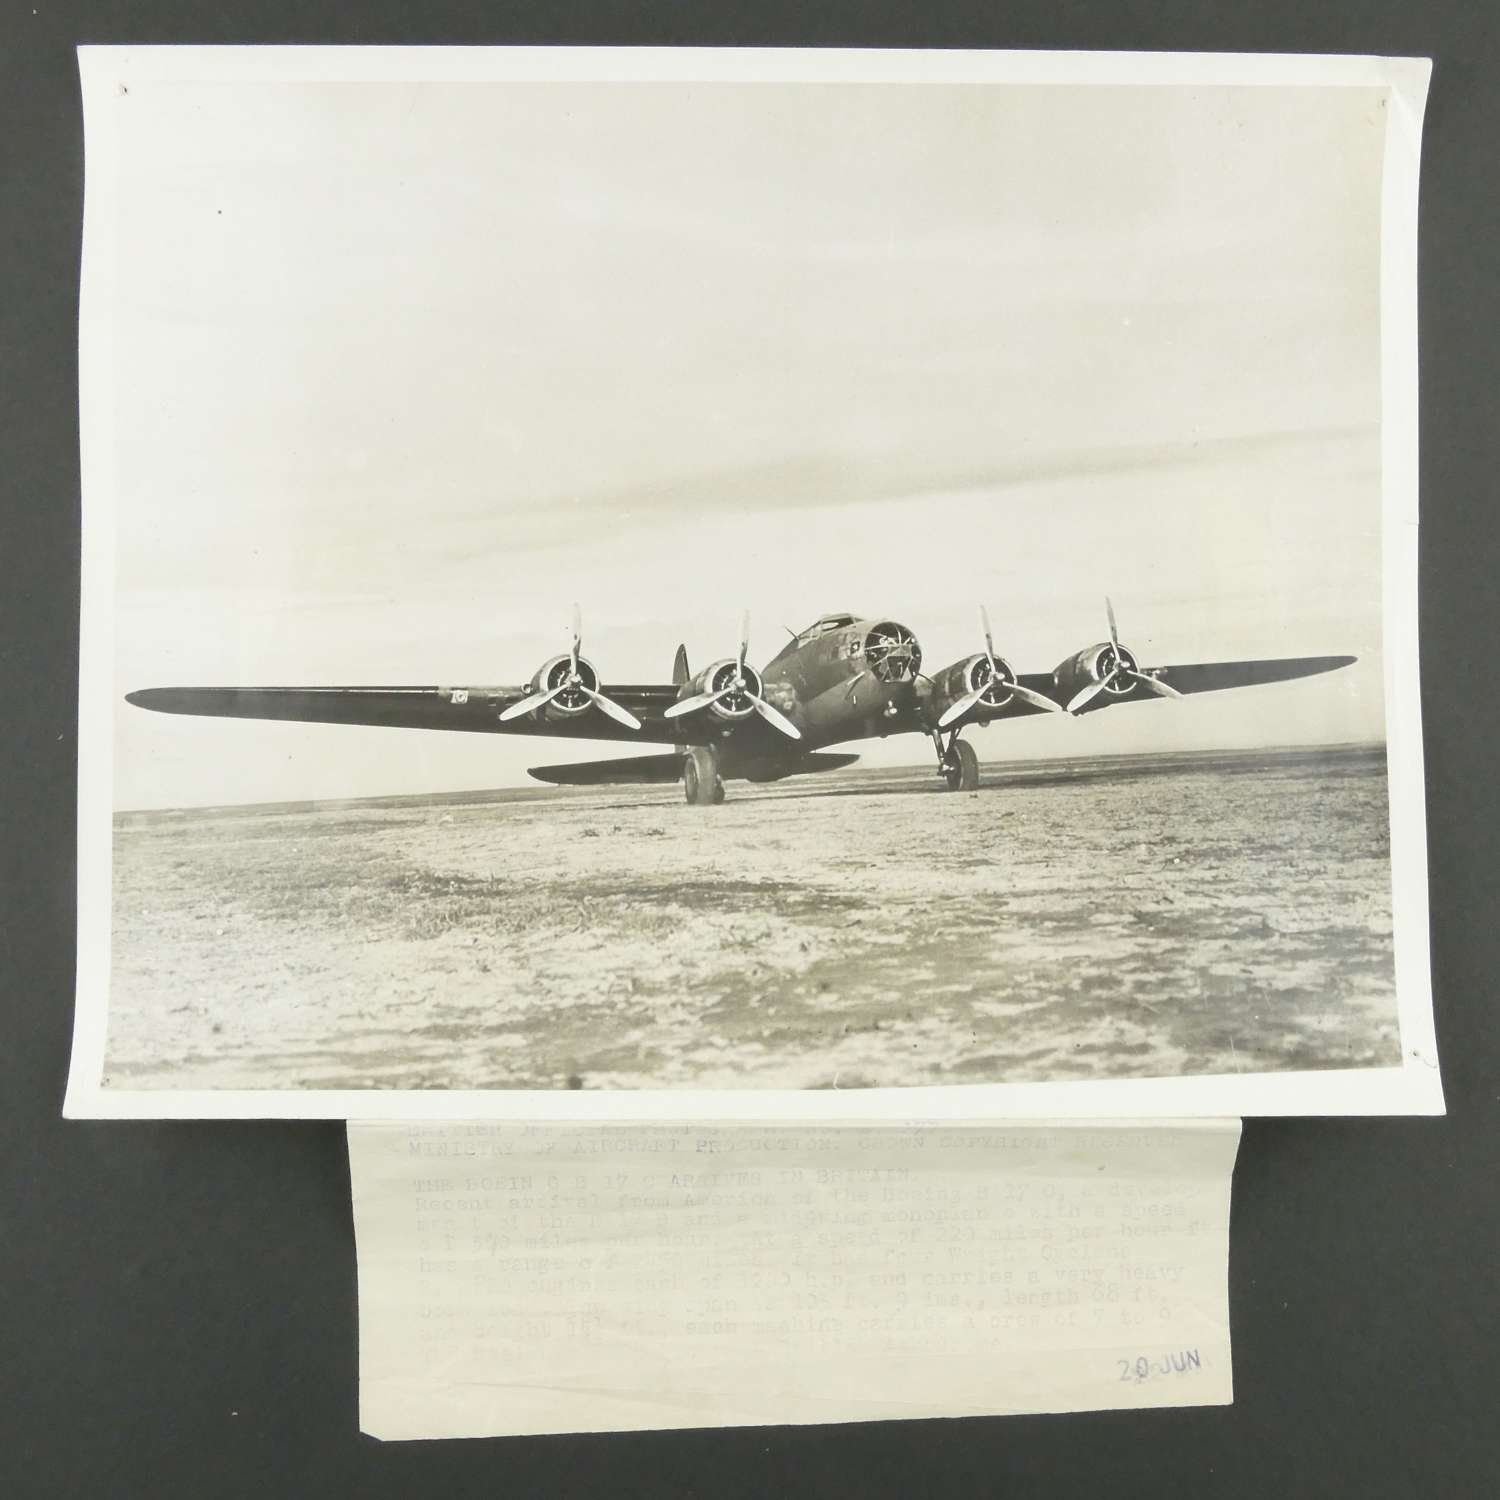 British official photograph - B-17 arrives in Britain